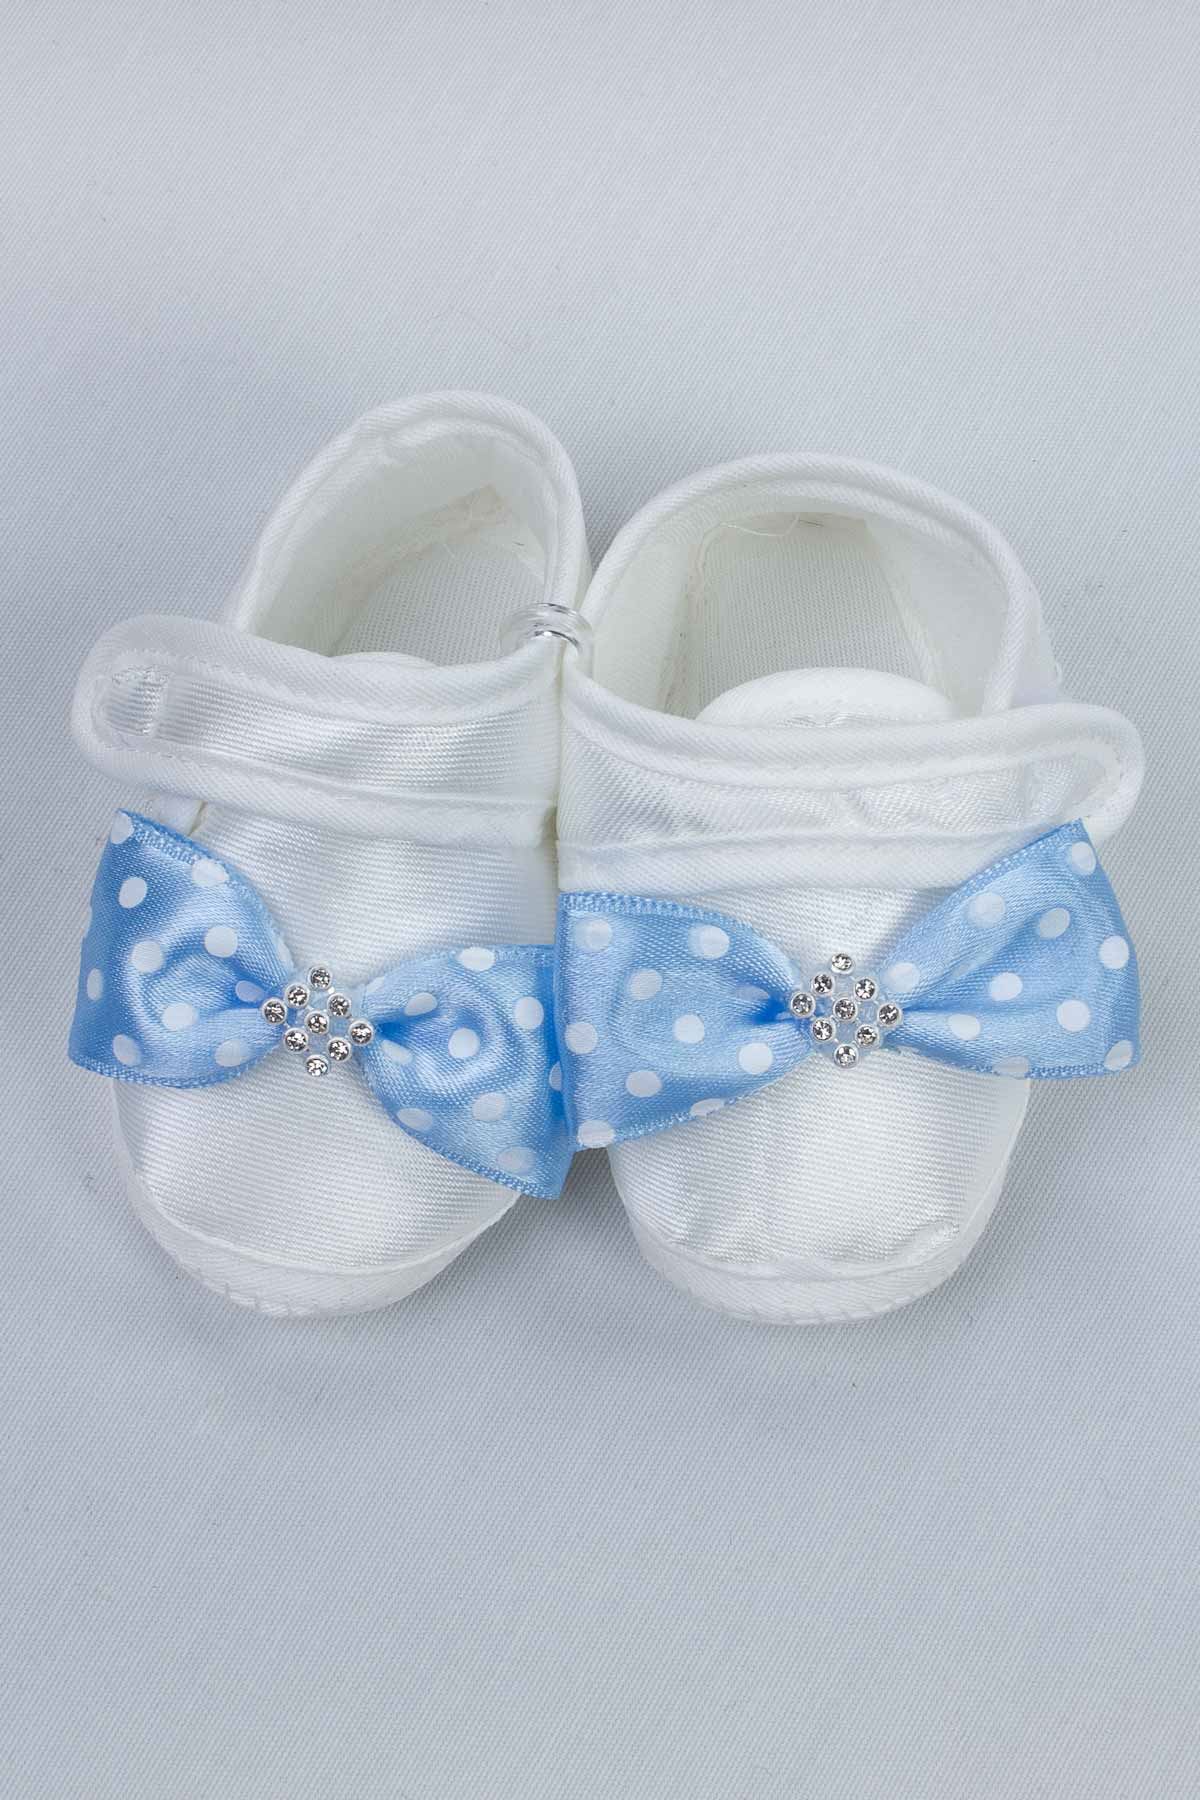 Blue Puerperal Crown Slippers and Baby Booties Hat Set